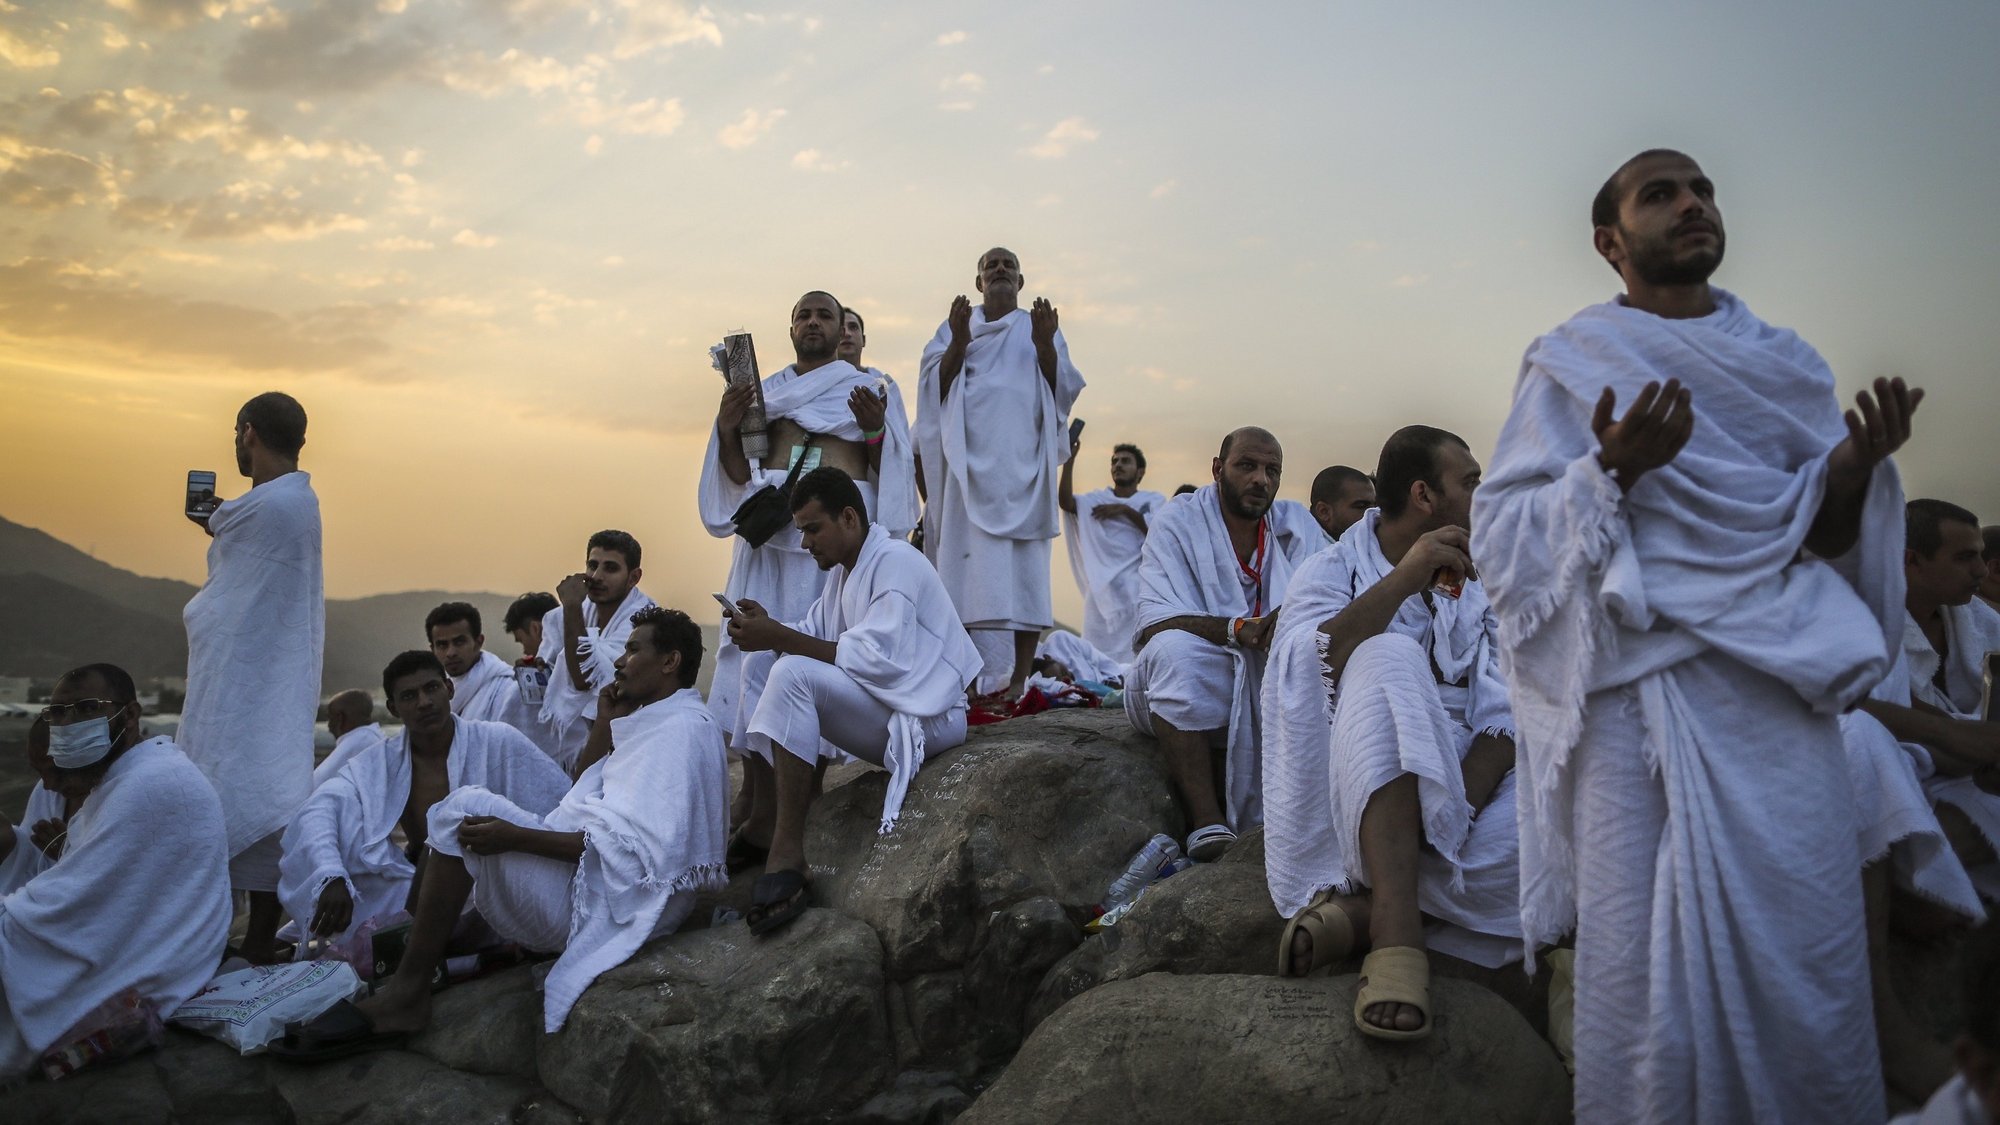 epa06173141 Muslim worshippers pray during the Hajj pilgrimage on the Mount Arafat, near Mecca, Saudi Arabia, 31 August 2017. Around 2.6 million Muslims are expected to attend this year&#039;s Hajj pilgrimage, which is highlighted by the Day of Arafah, one day prior to Eid al-Adha. Eid al-Adha is the holiest of the two Muslims holidays celebrated each year, it marks the yearly Muslim pilgrimage (Hajj) to visit Mecca, the holiest place in Islam. Muslims slaughter a sacrificial animal and split the meat into three parts, one for the family, one for friends and relatives, and one for the poor and needy.  EPA/MAST IRHAM